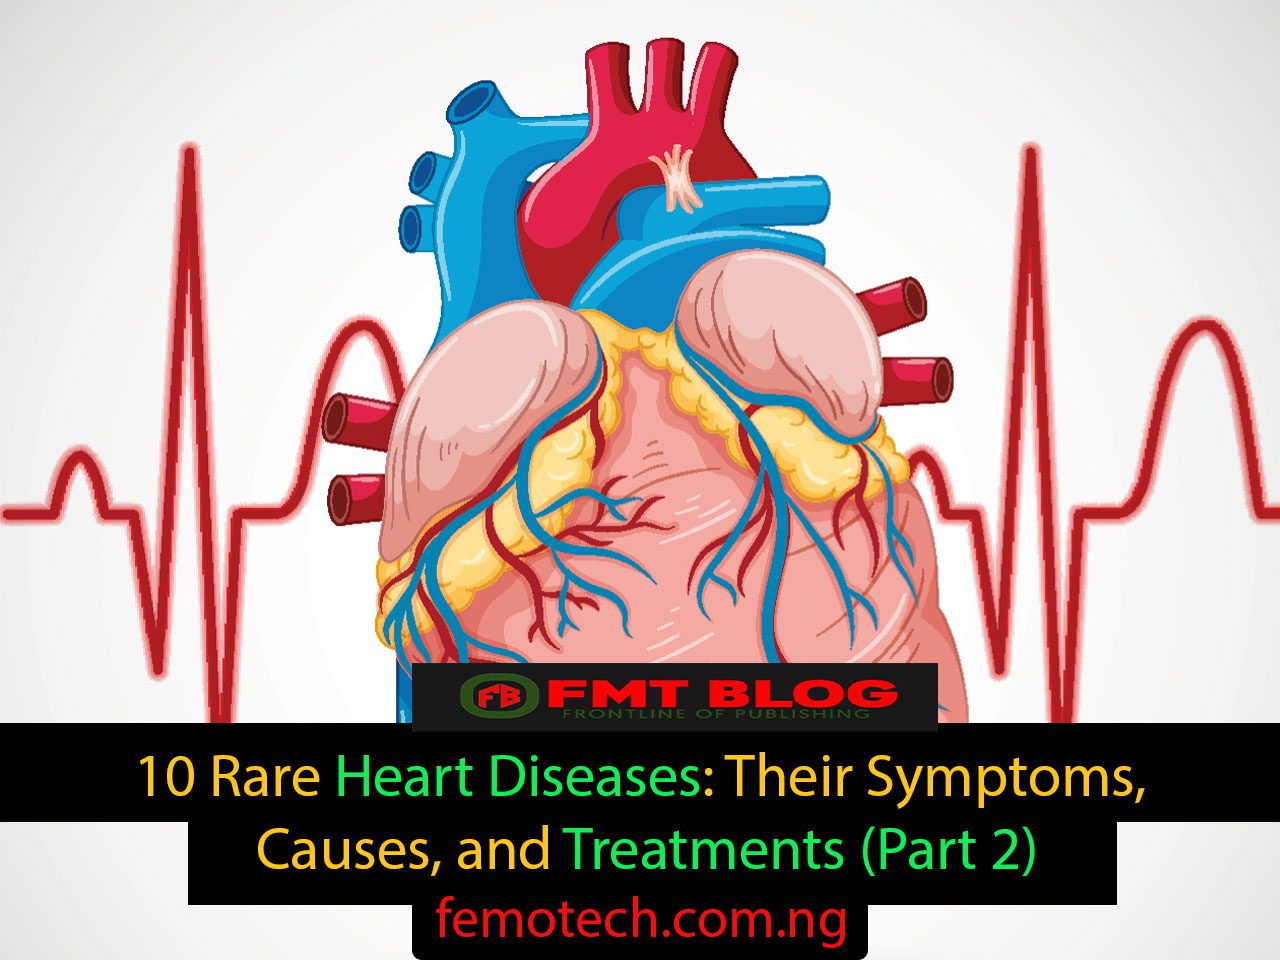 10 Rare Heart Diseases: Their Symptoms, Causes, and Treatments (Part 2)